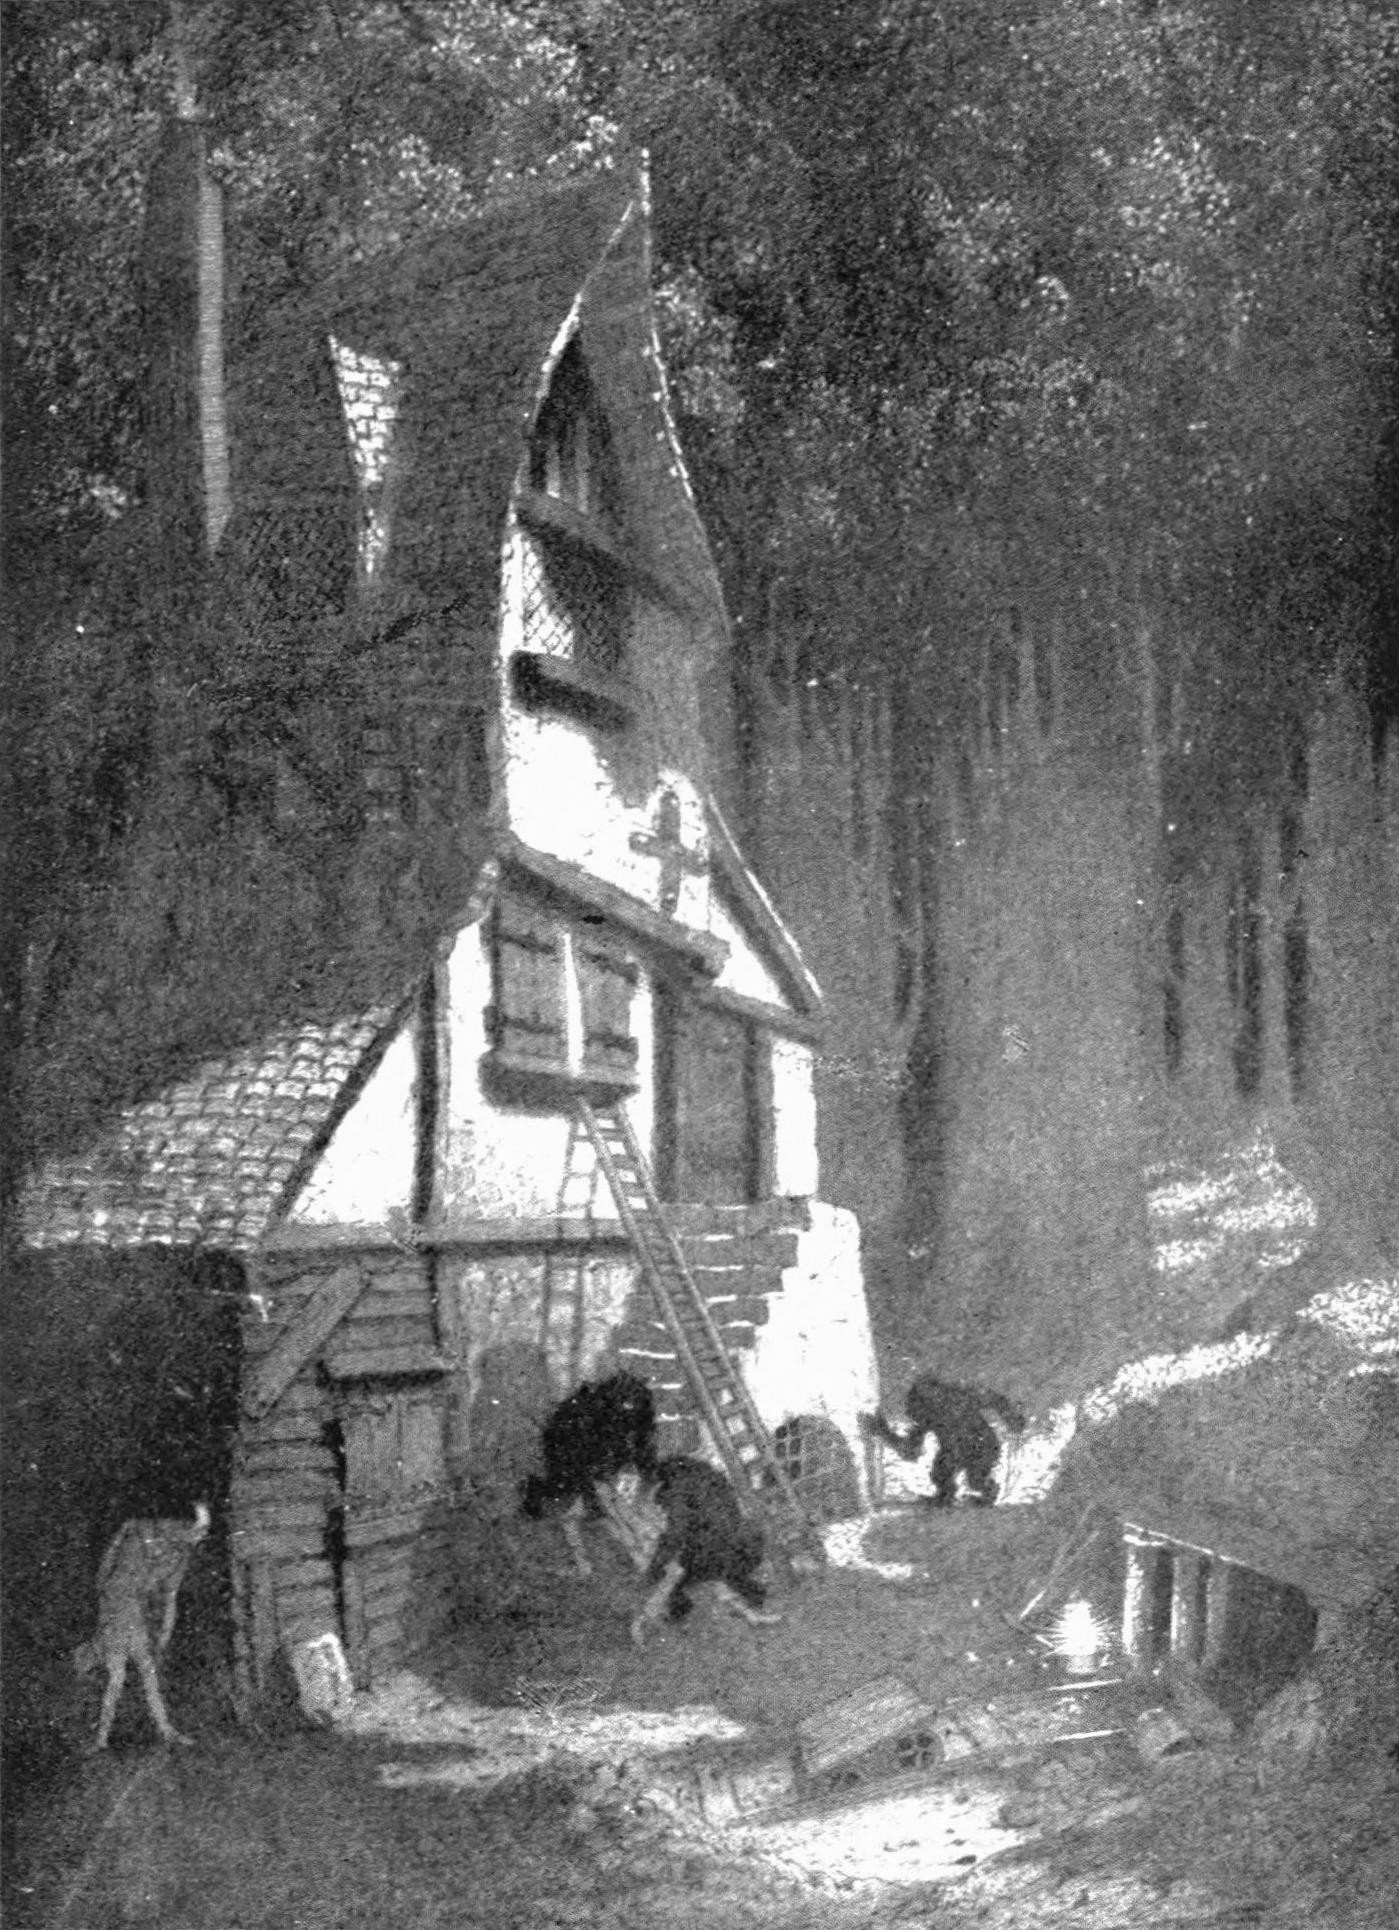 A man hides behind a tall cottage in the woods as dark upright creatures approach the door. A minecar to the right is ready to enter a mineshaft.